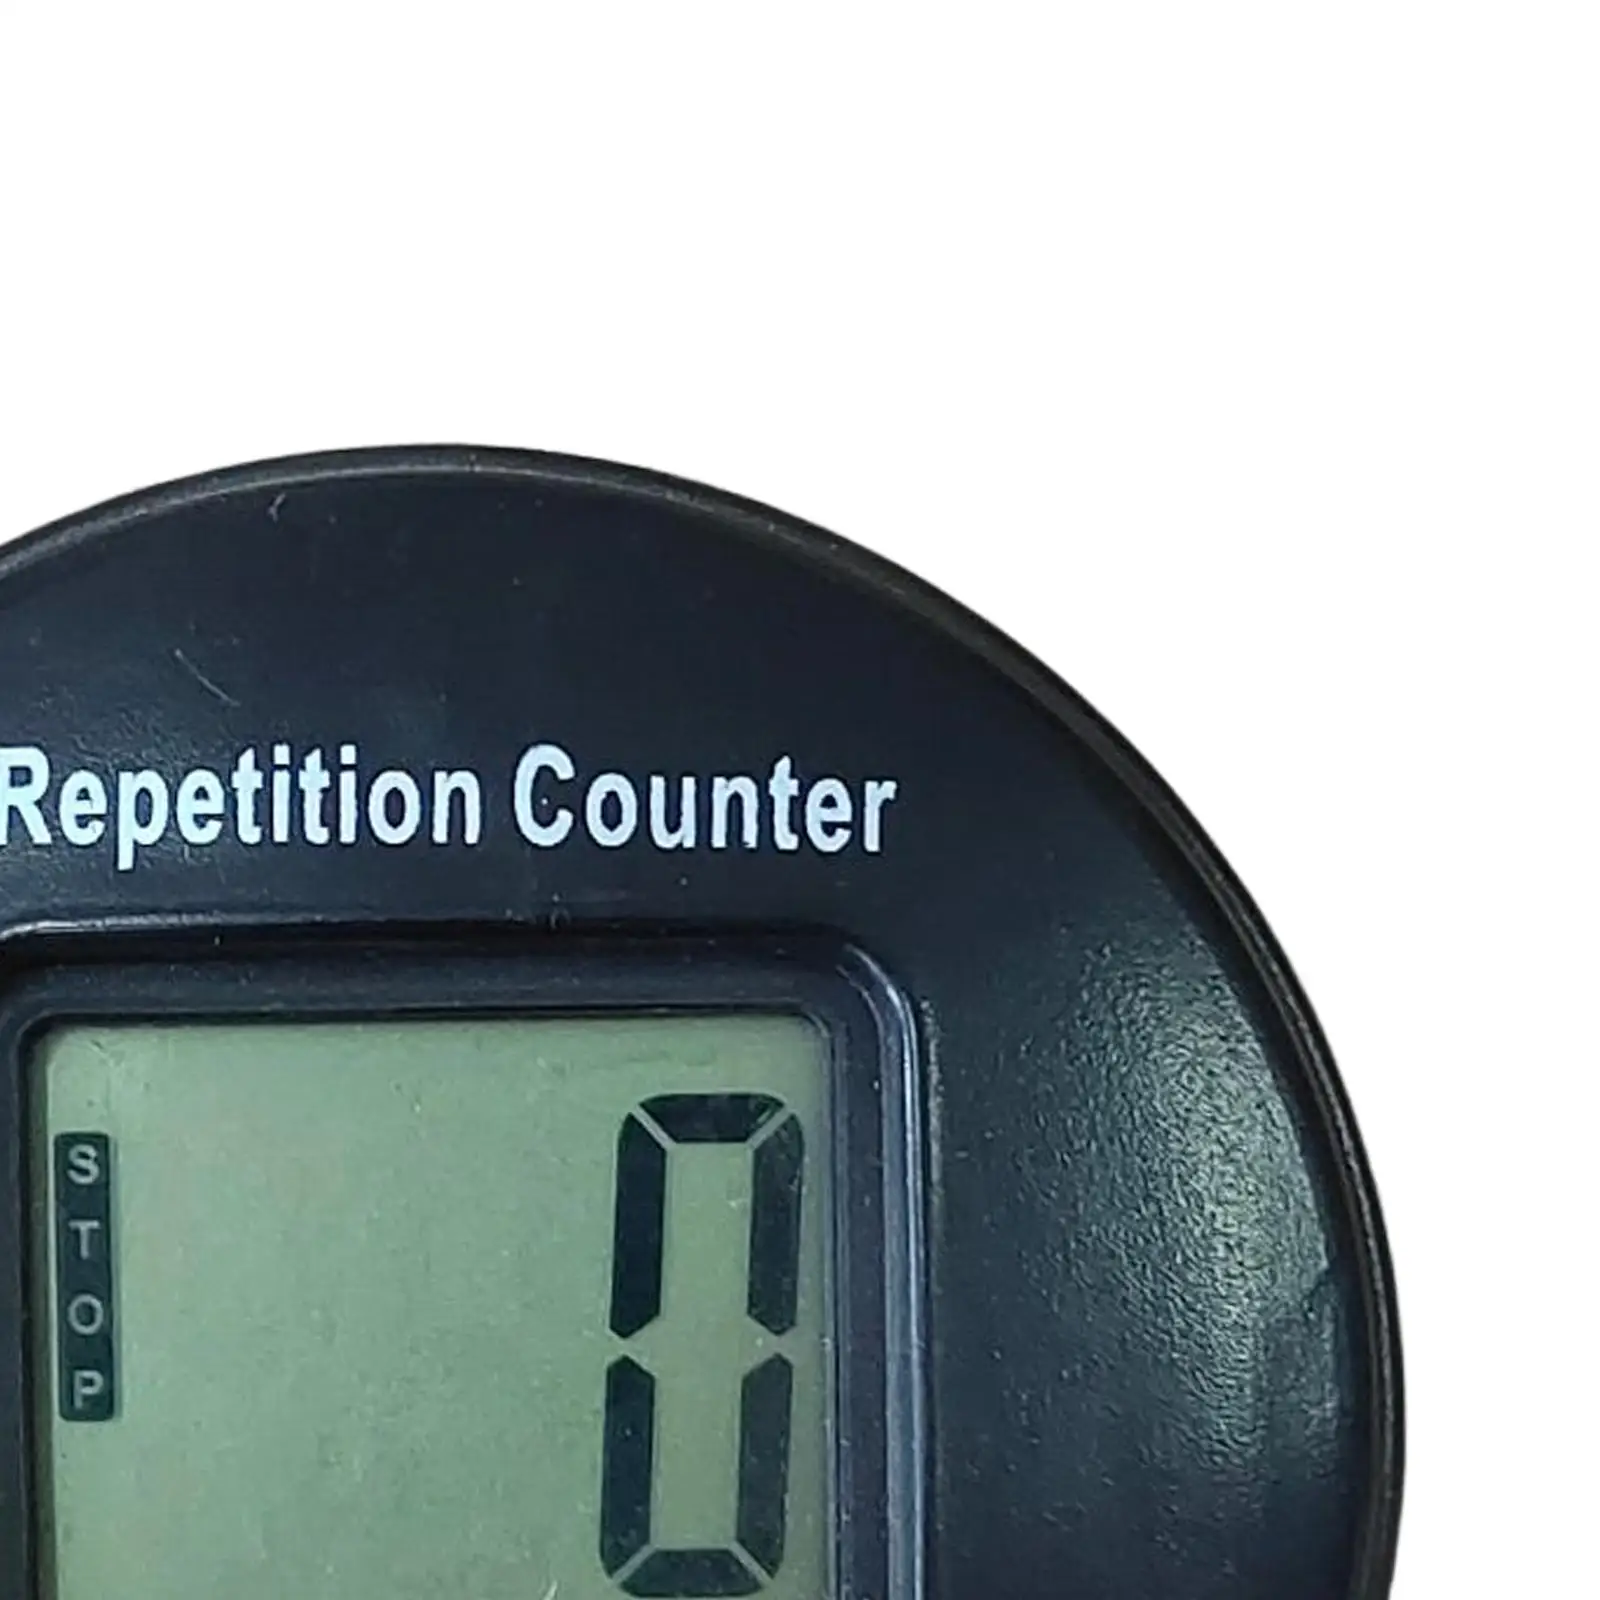 Counter LCD Display Digital Monitor Meter Electronic Speed Meter Step Machine Riding Machine Stepper Calories